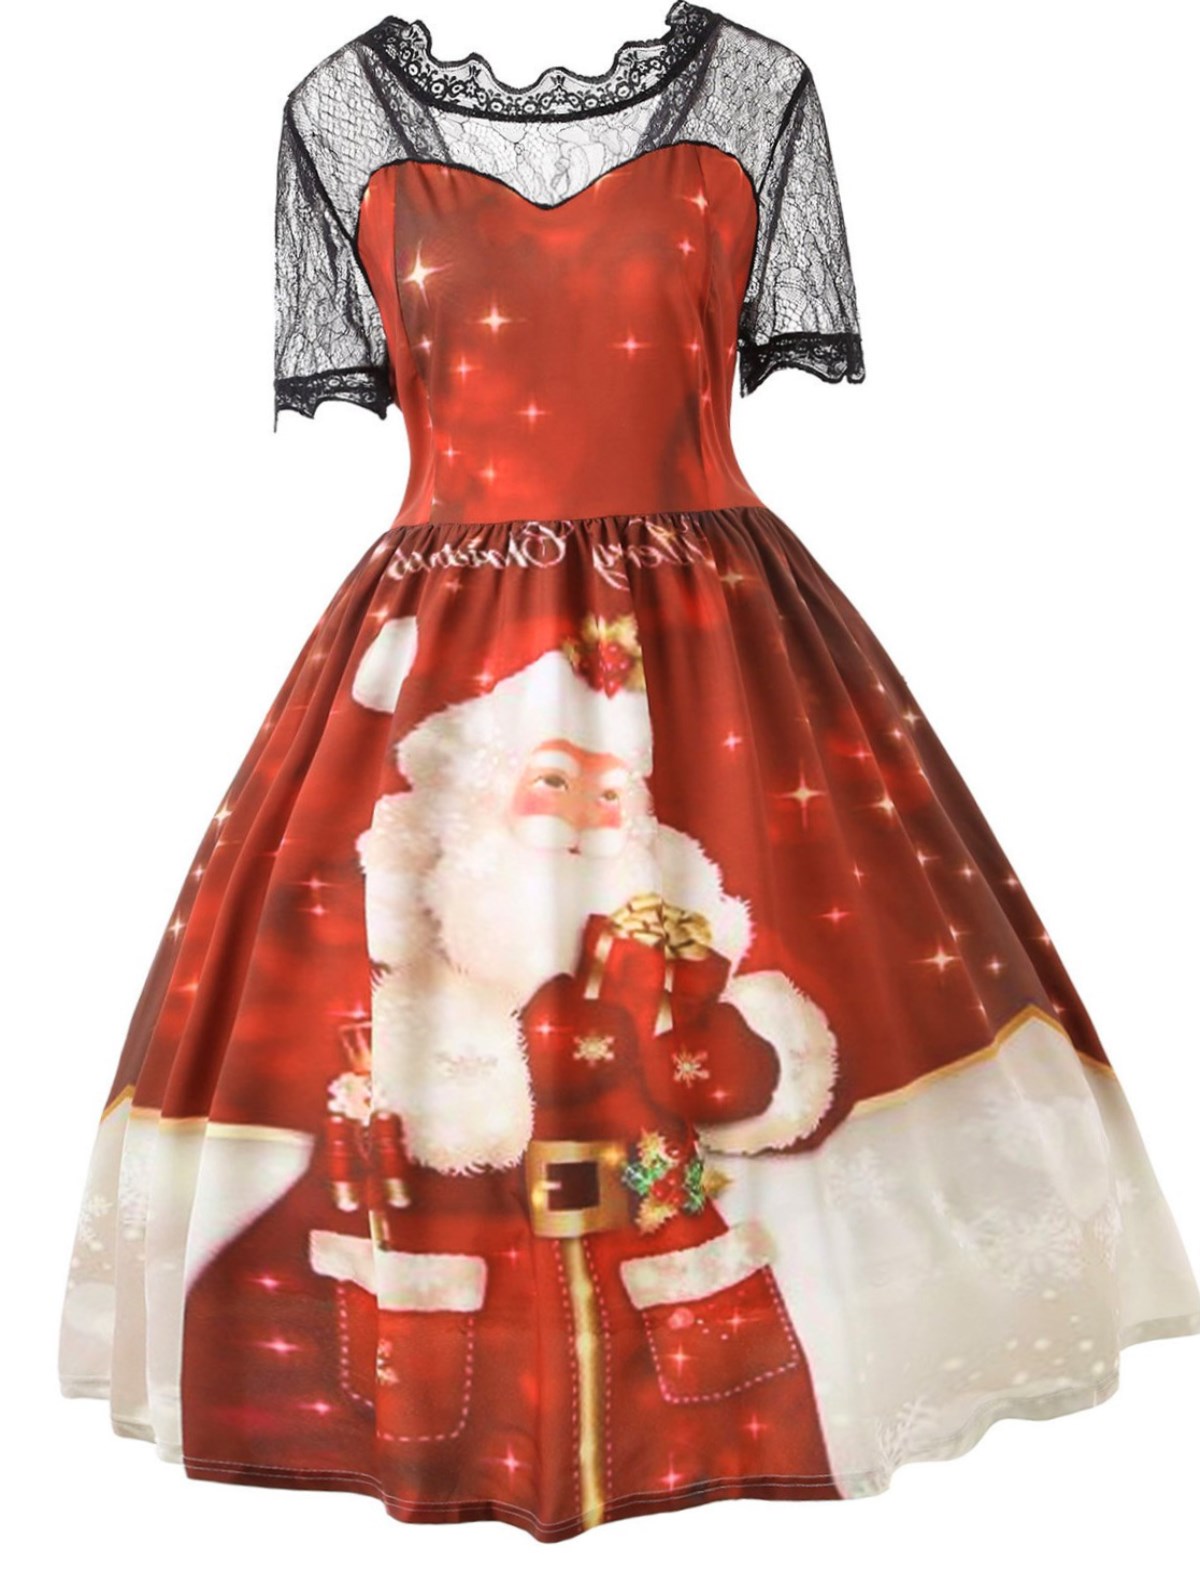 Plus size christmas dresses - Perfect choice for christmas party 2019-2020